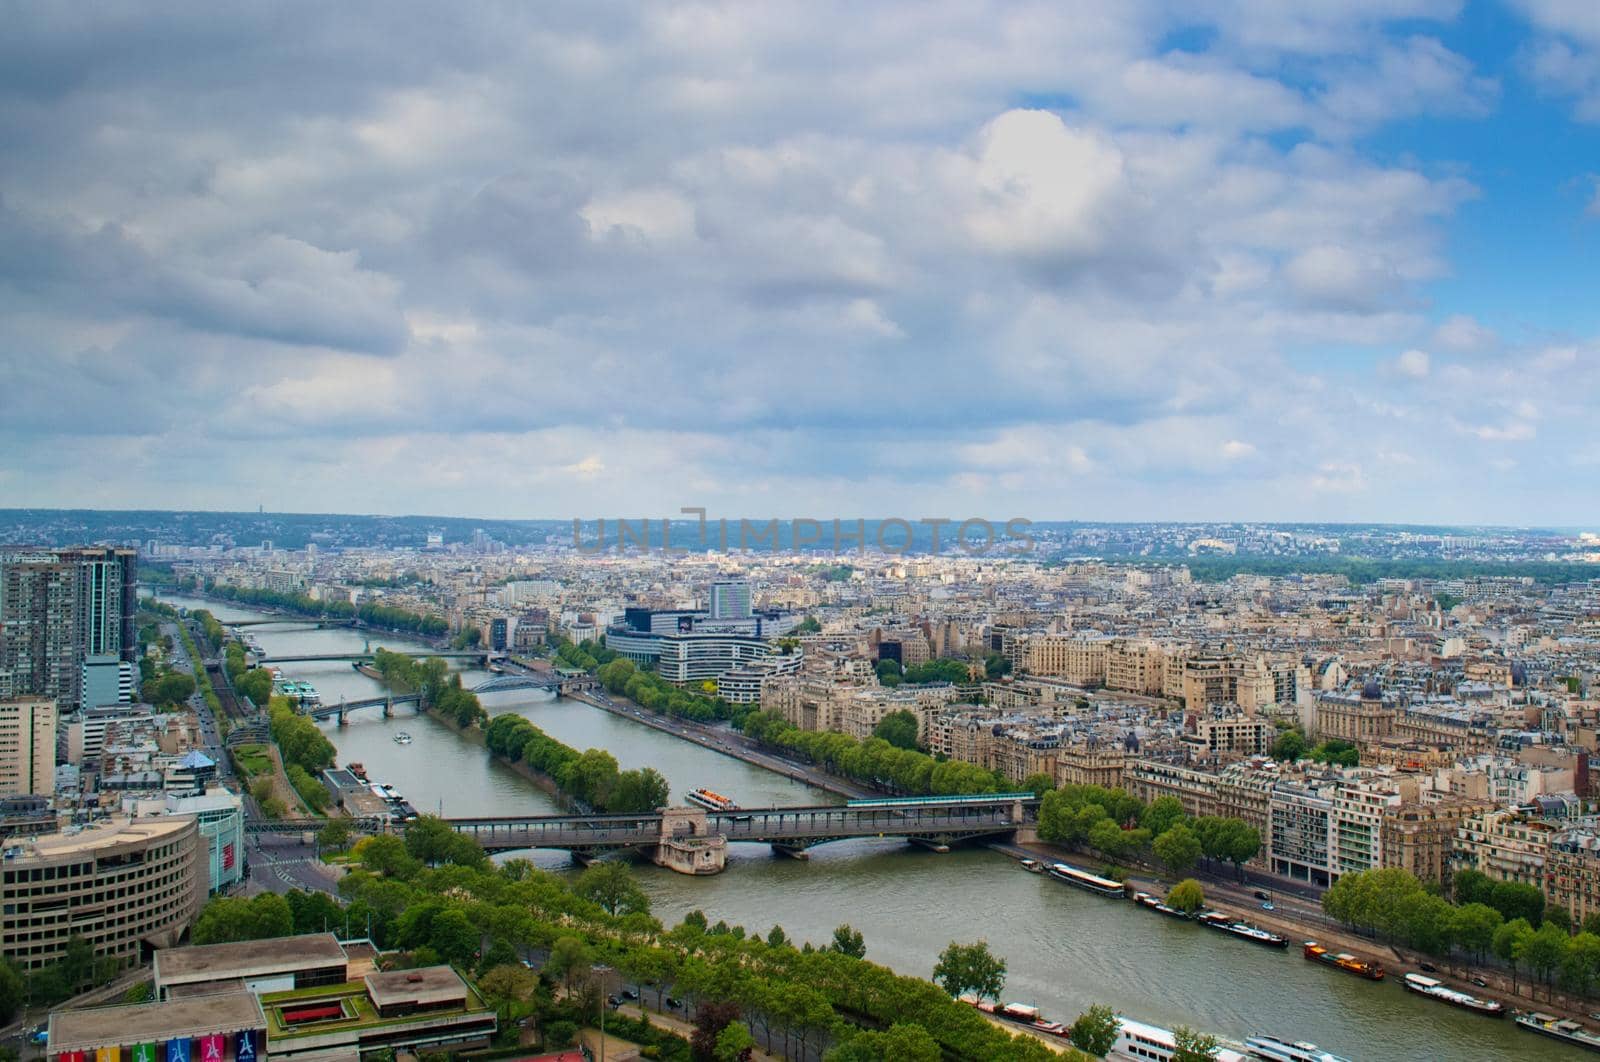 The city of Paris, the Seine river and the Island of the Swans, from the second platform of the Eiffel Tower, heading west. by hernan_hyper